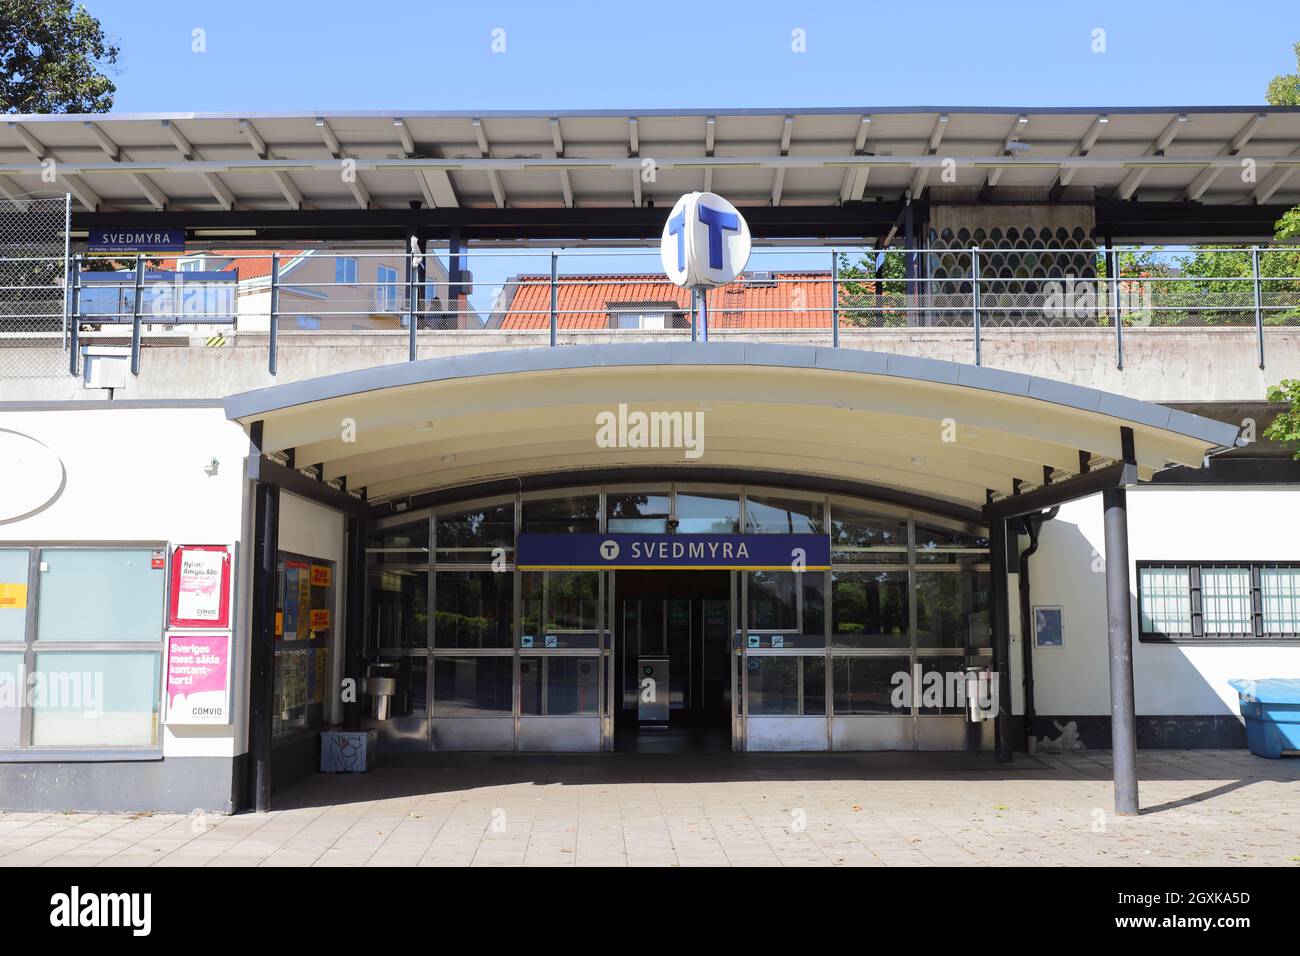 Stockholm, Sweden - August 31, 2021: The entrance to the outdoor metro station Svedmyra. Stock Photo